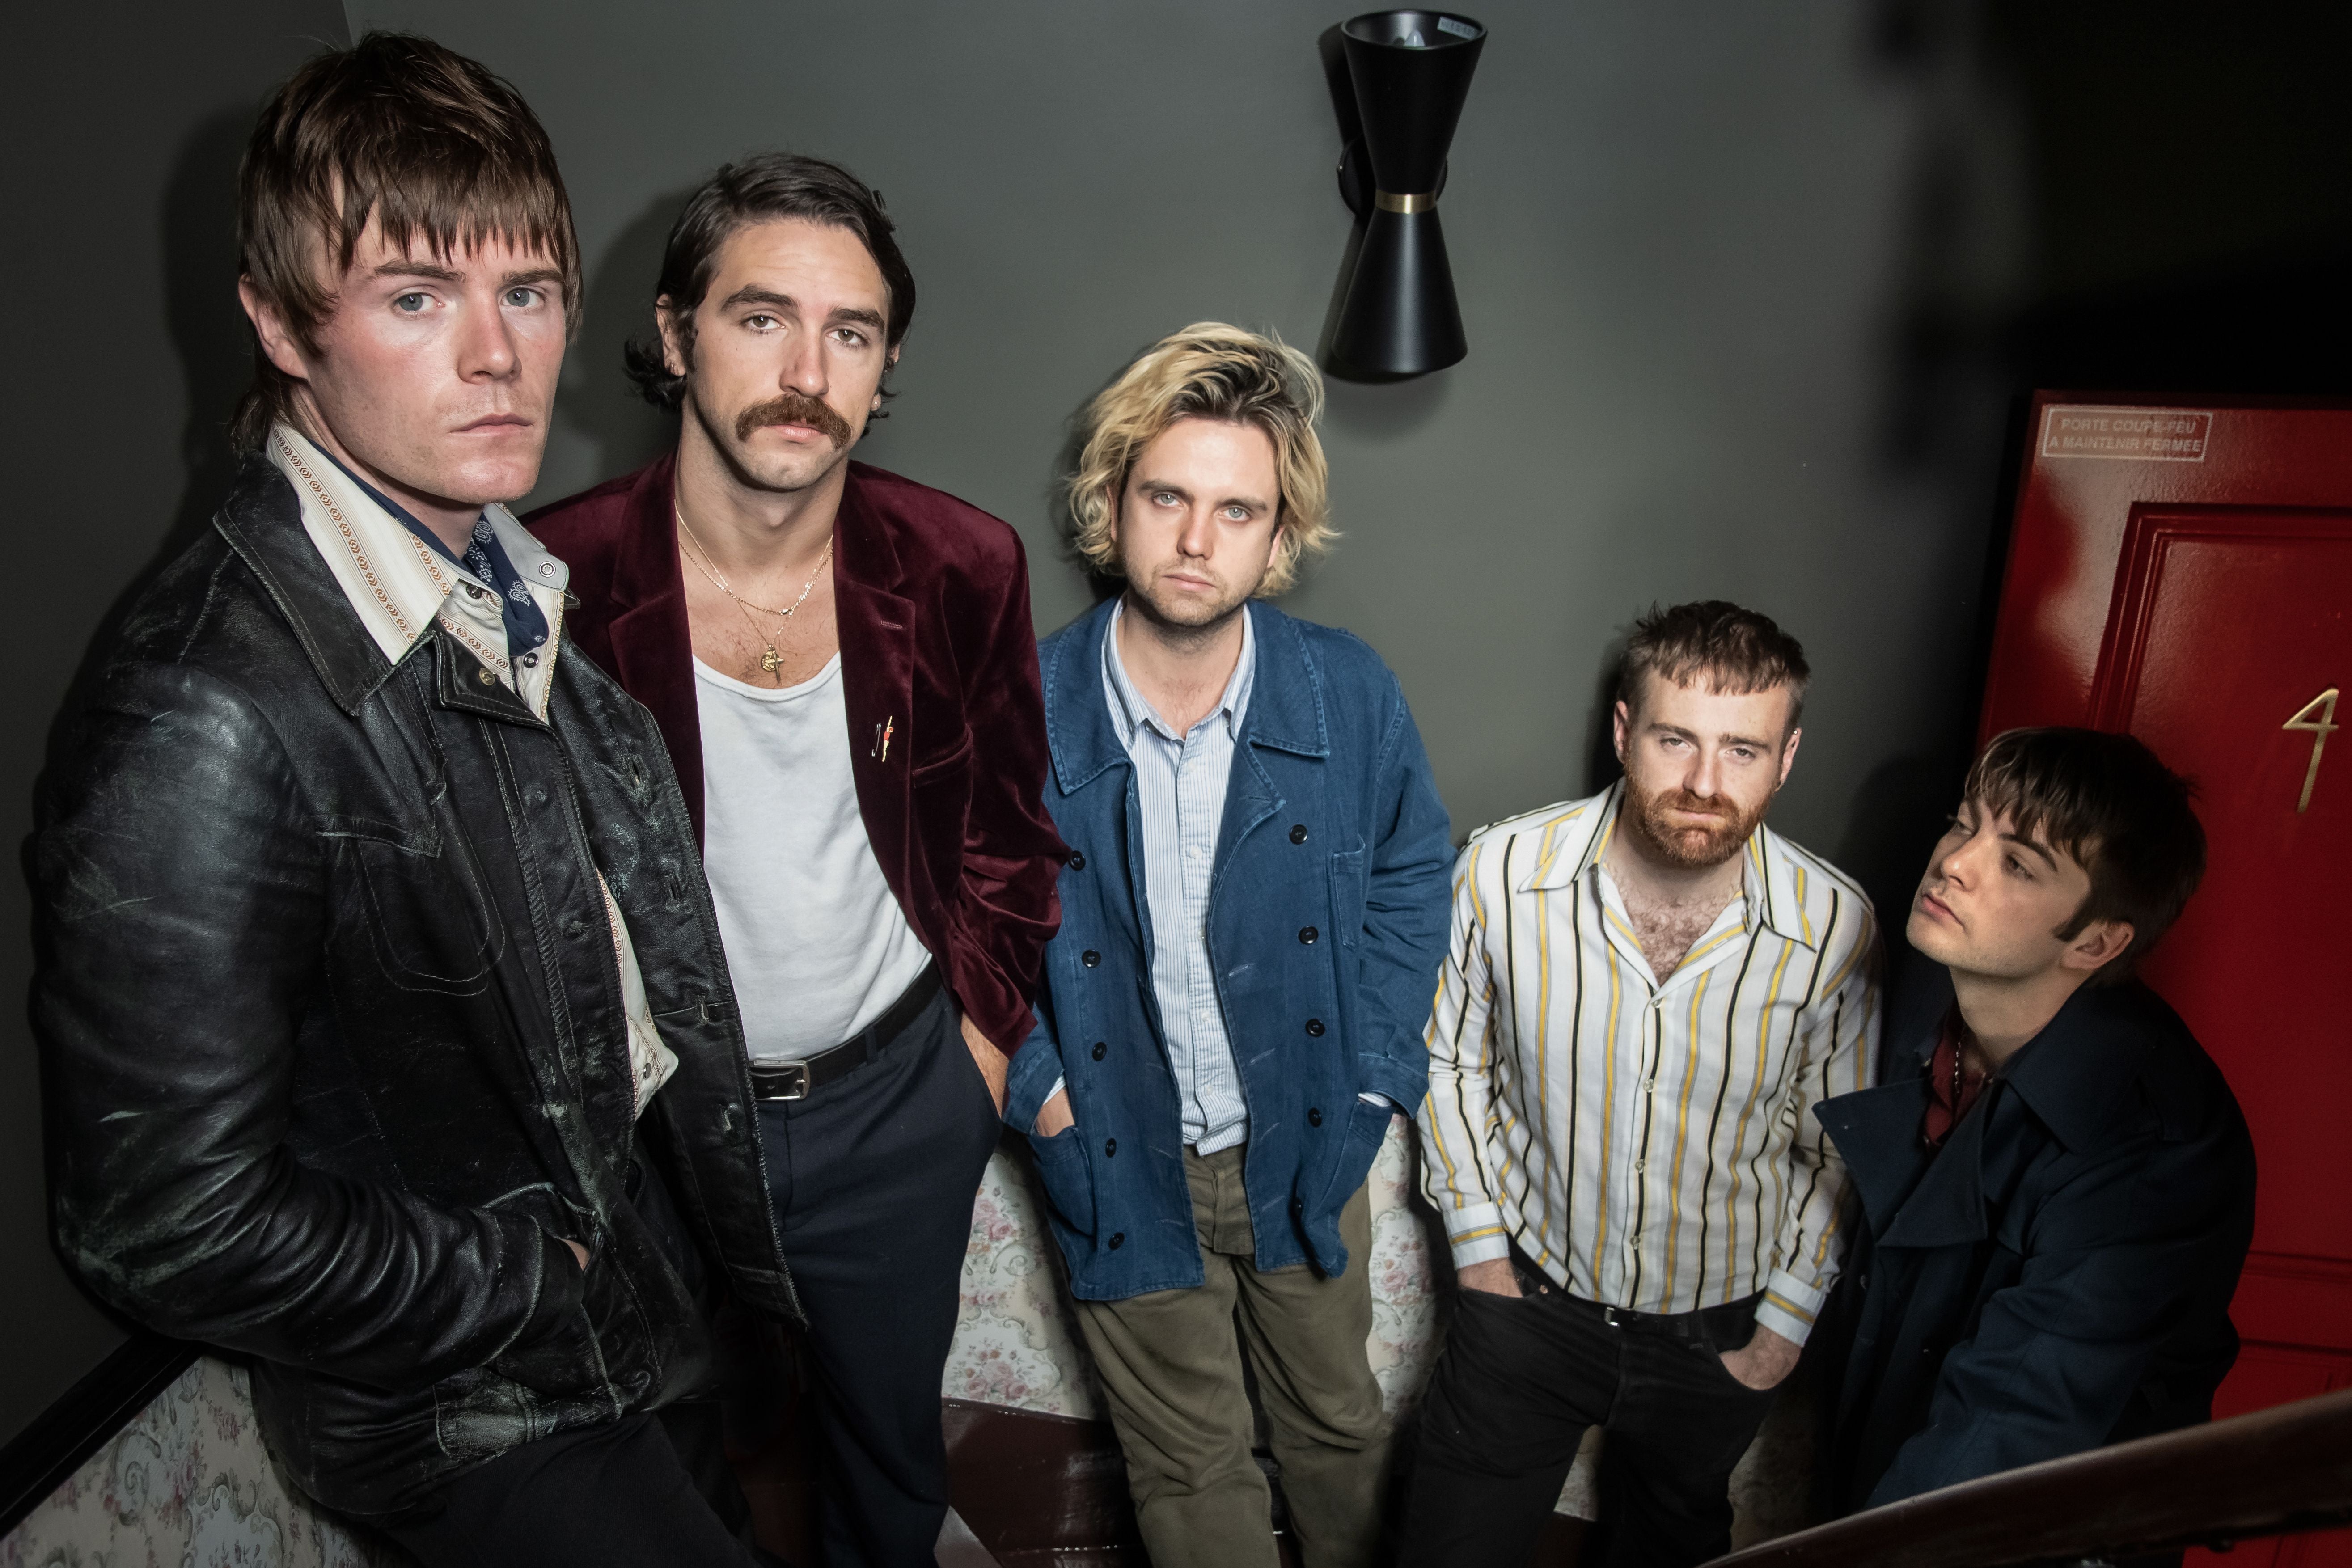 Fontaines DC carry on the same spirit of their post-punk predecessors